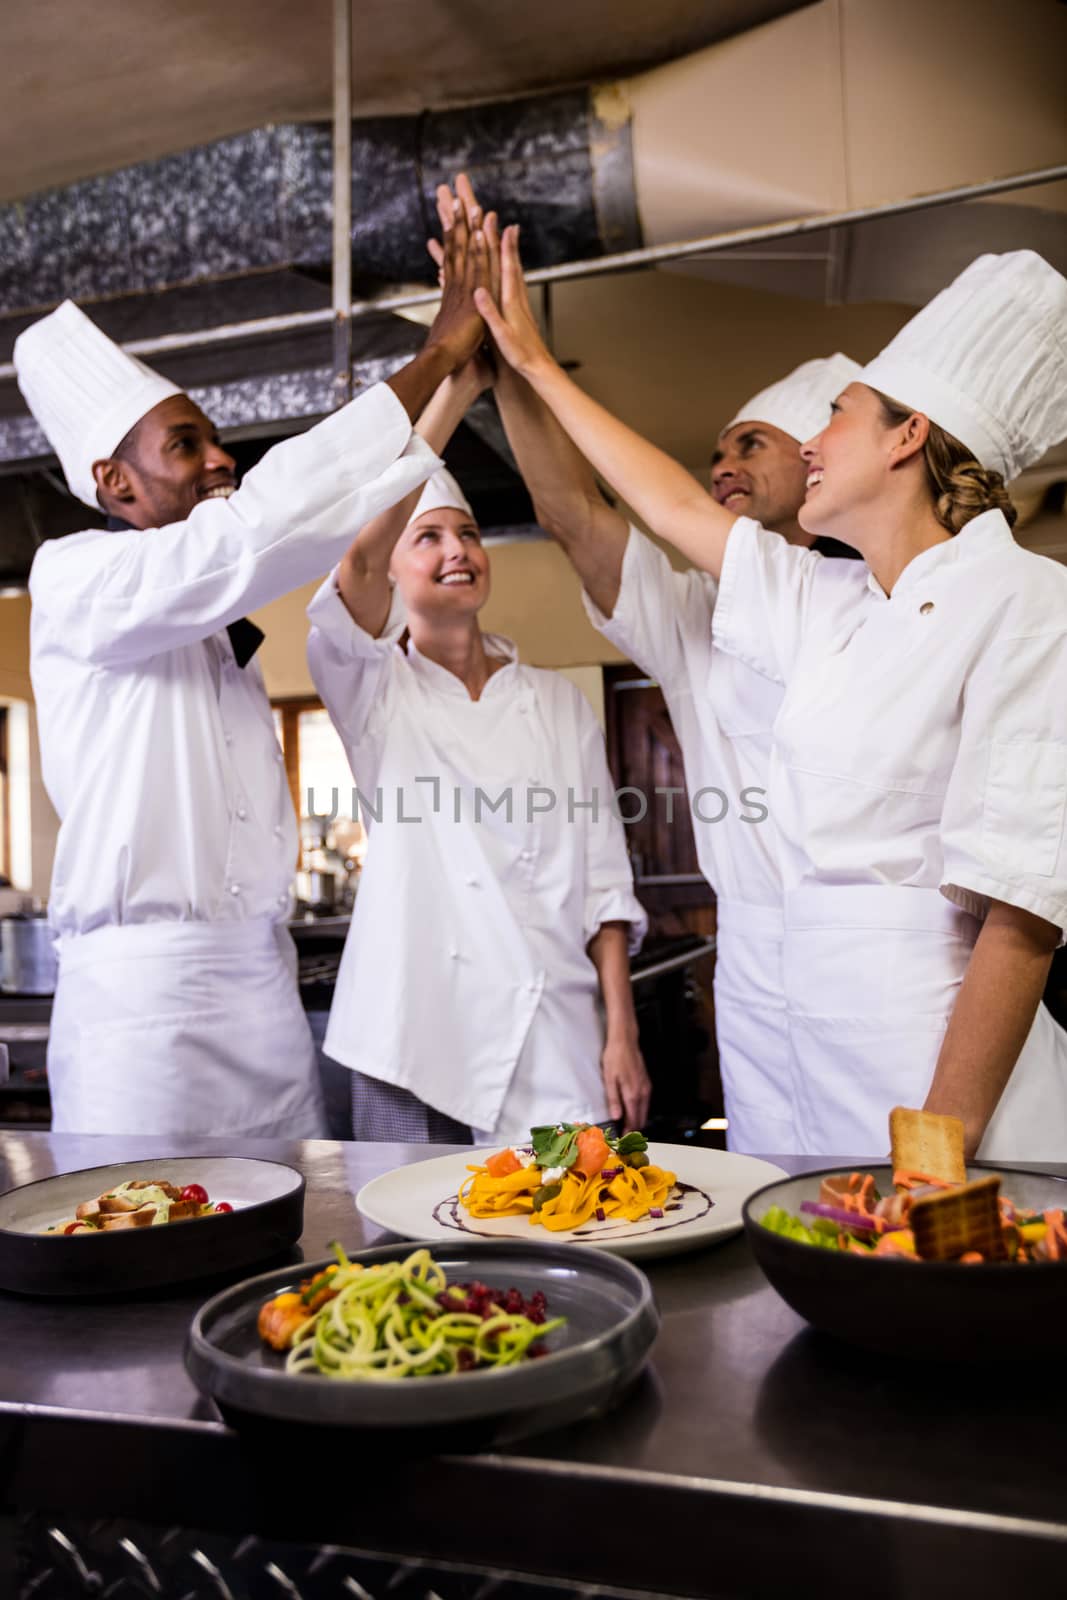 Group of chefs formig hands stack in kitchen at hotel